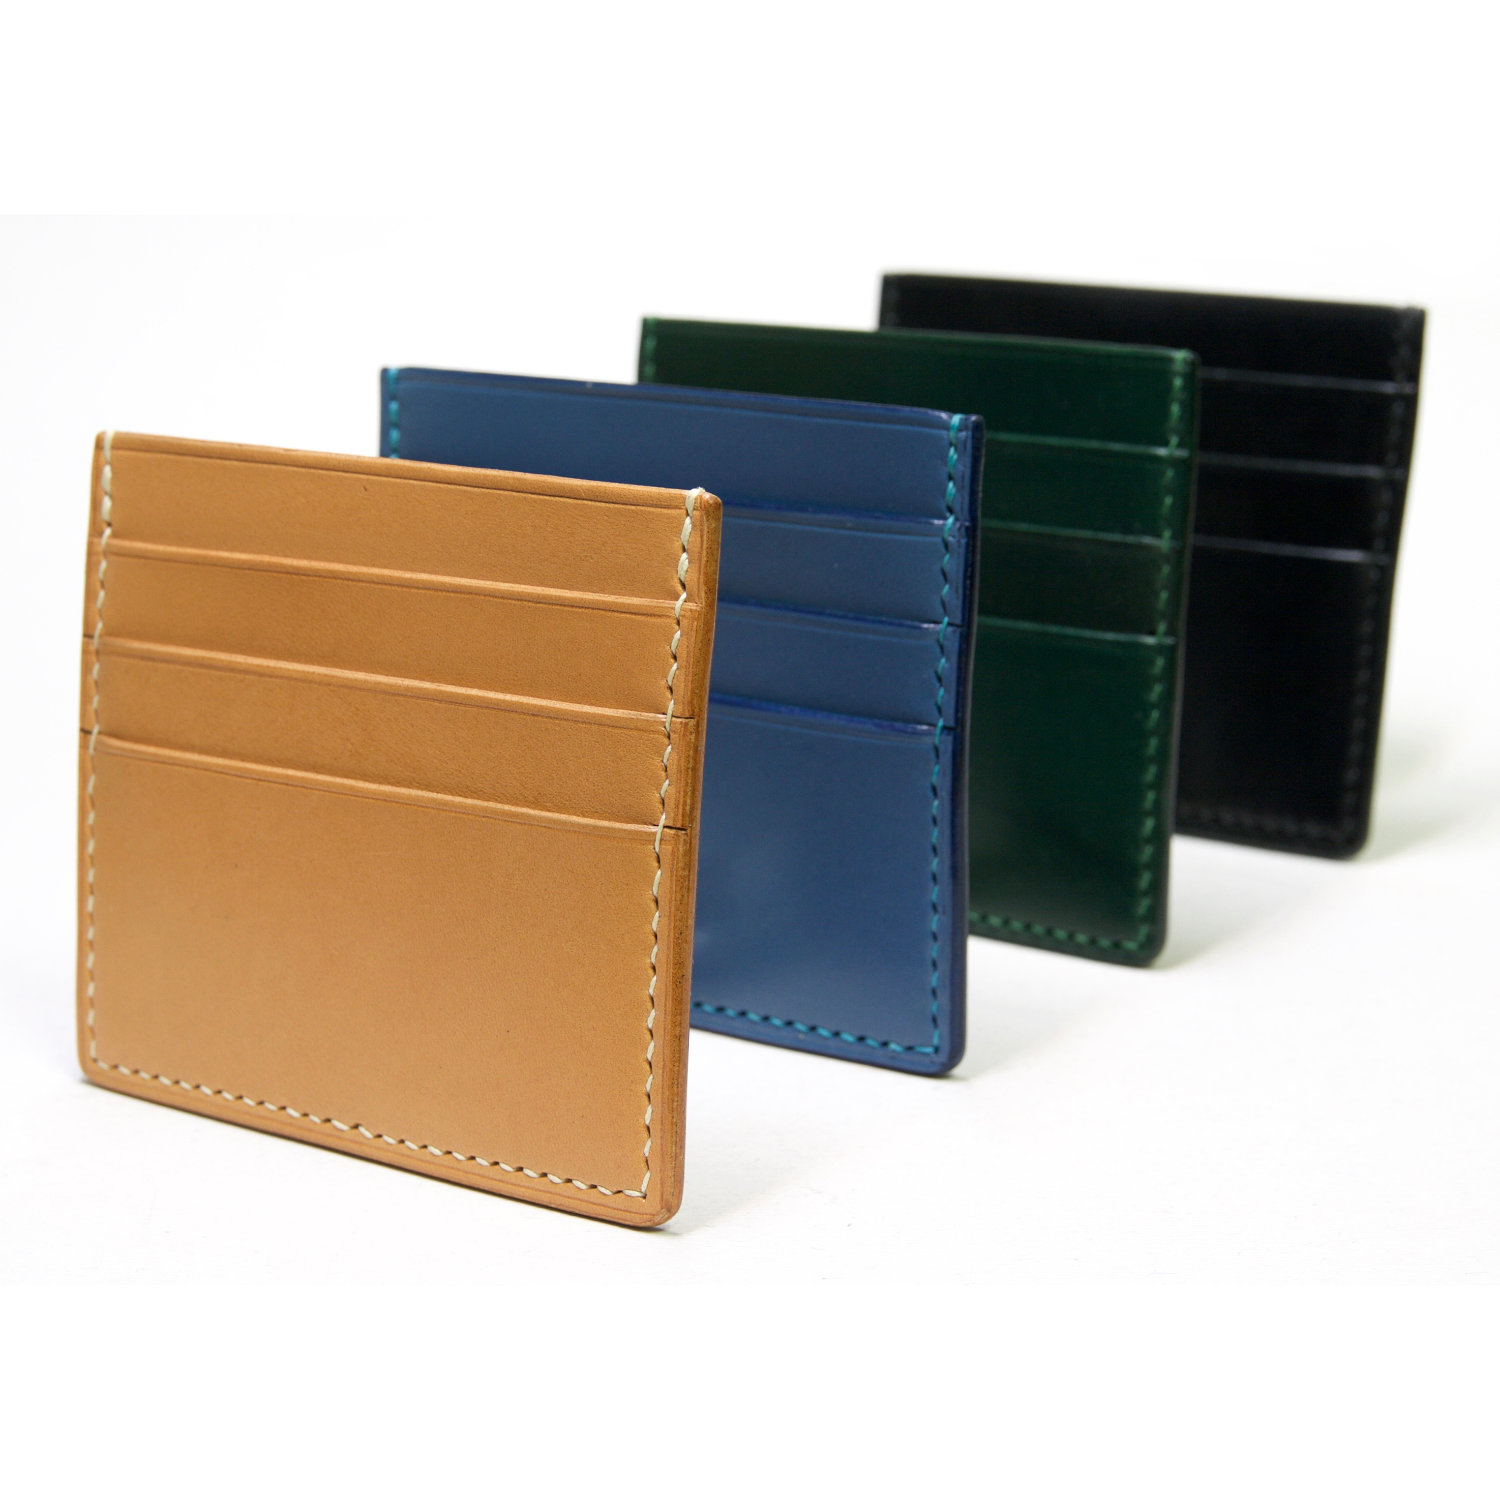 leather cardholders standing in a row front view